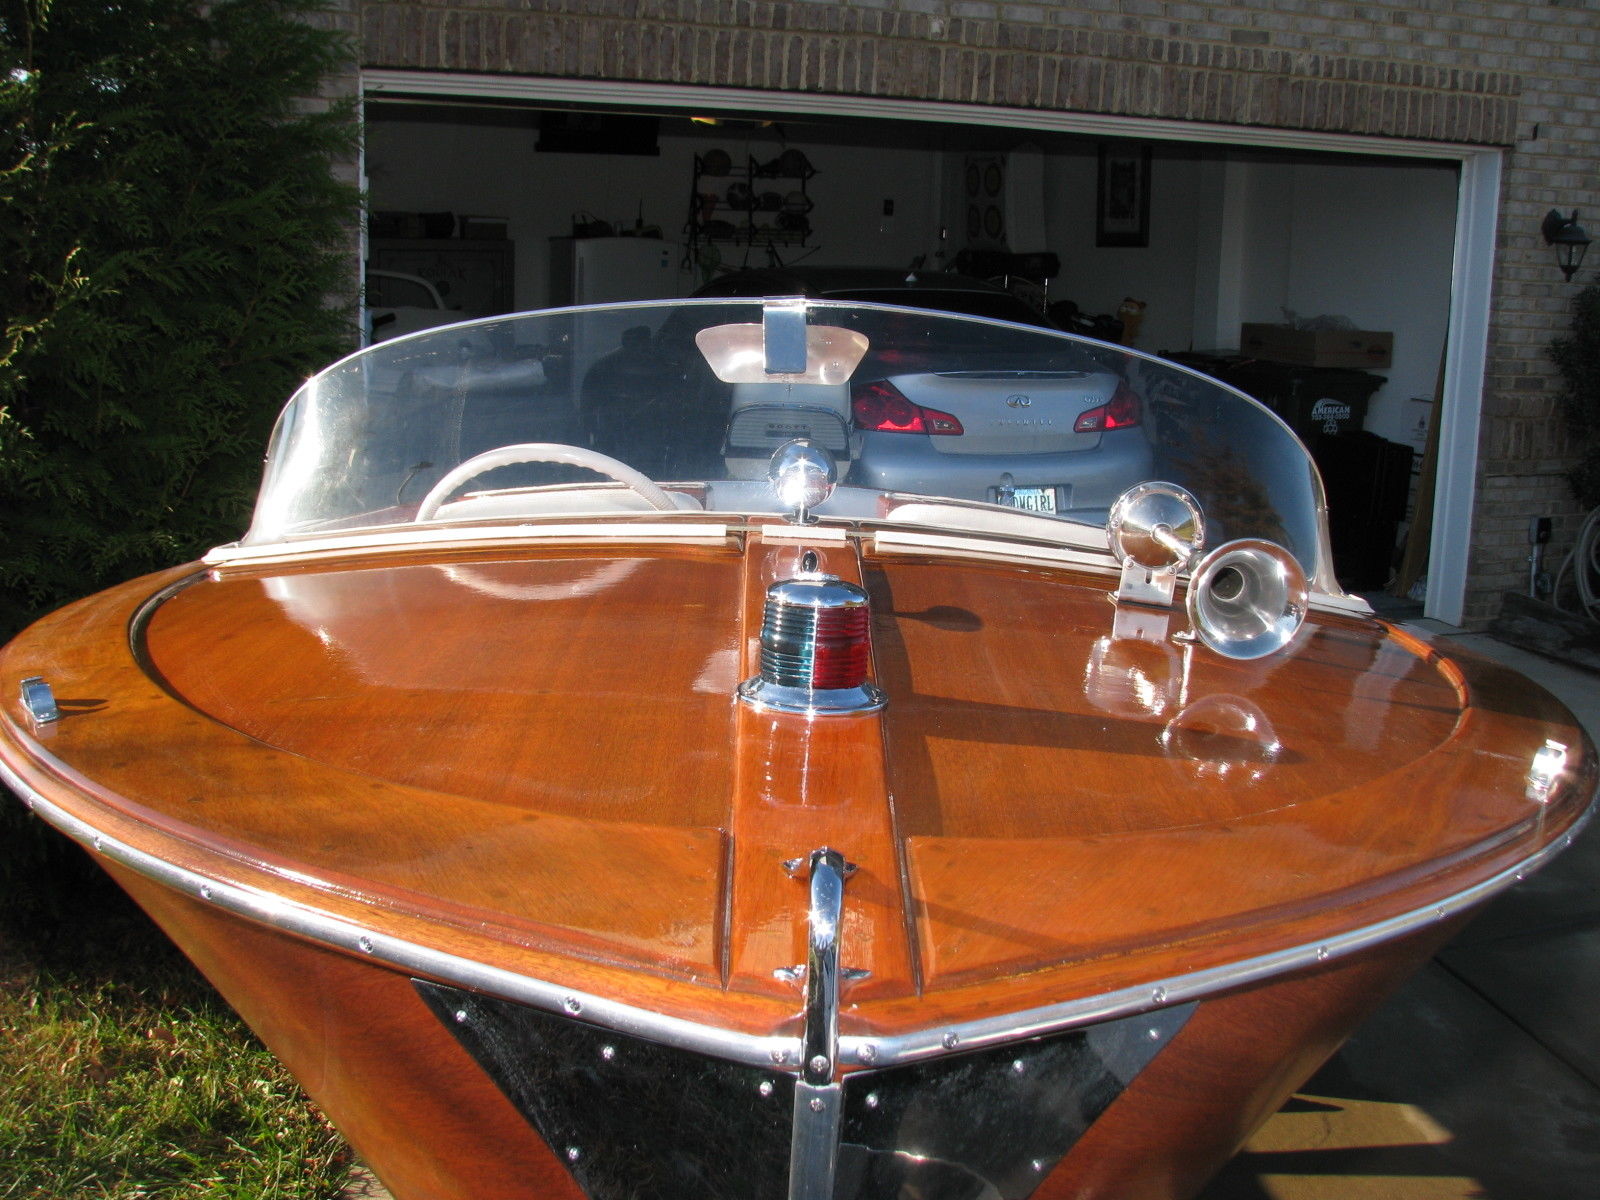 launch a wood runabout